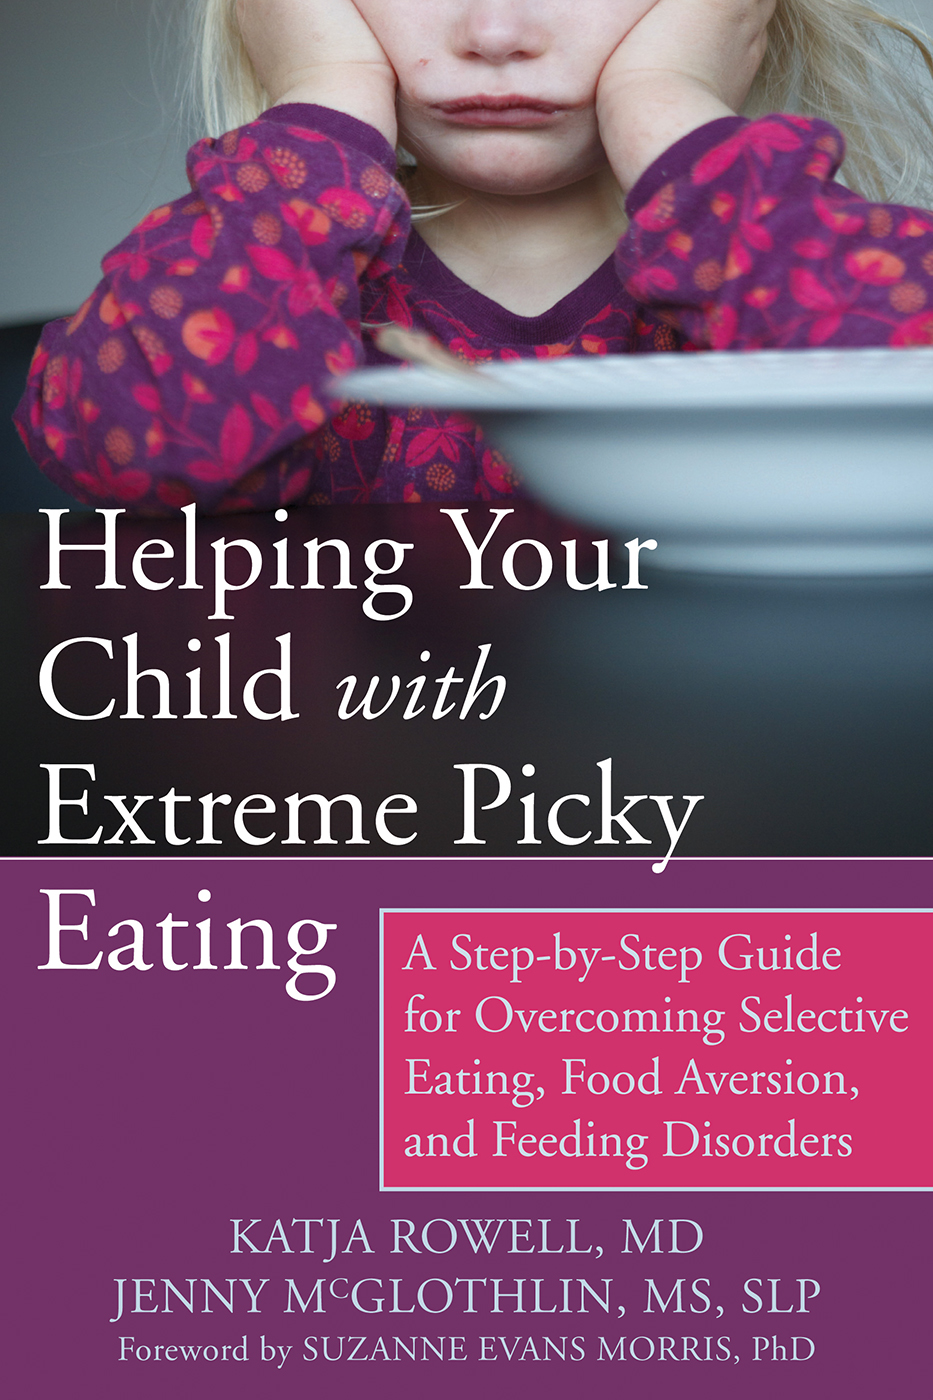 What I appreciate most about Helping Your Child with Extreme Picky Eating is - photo 2